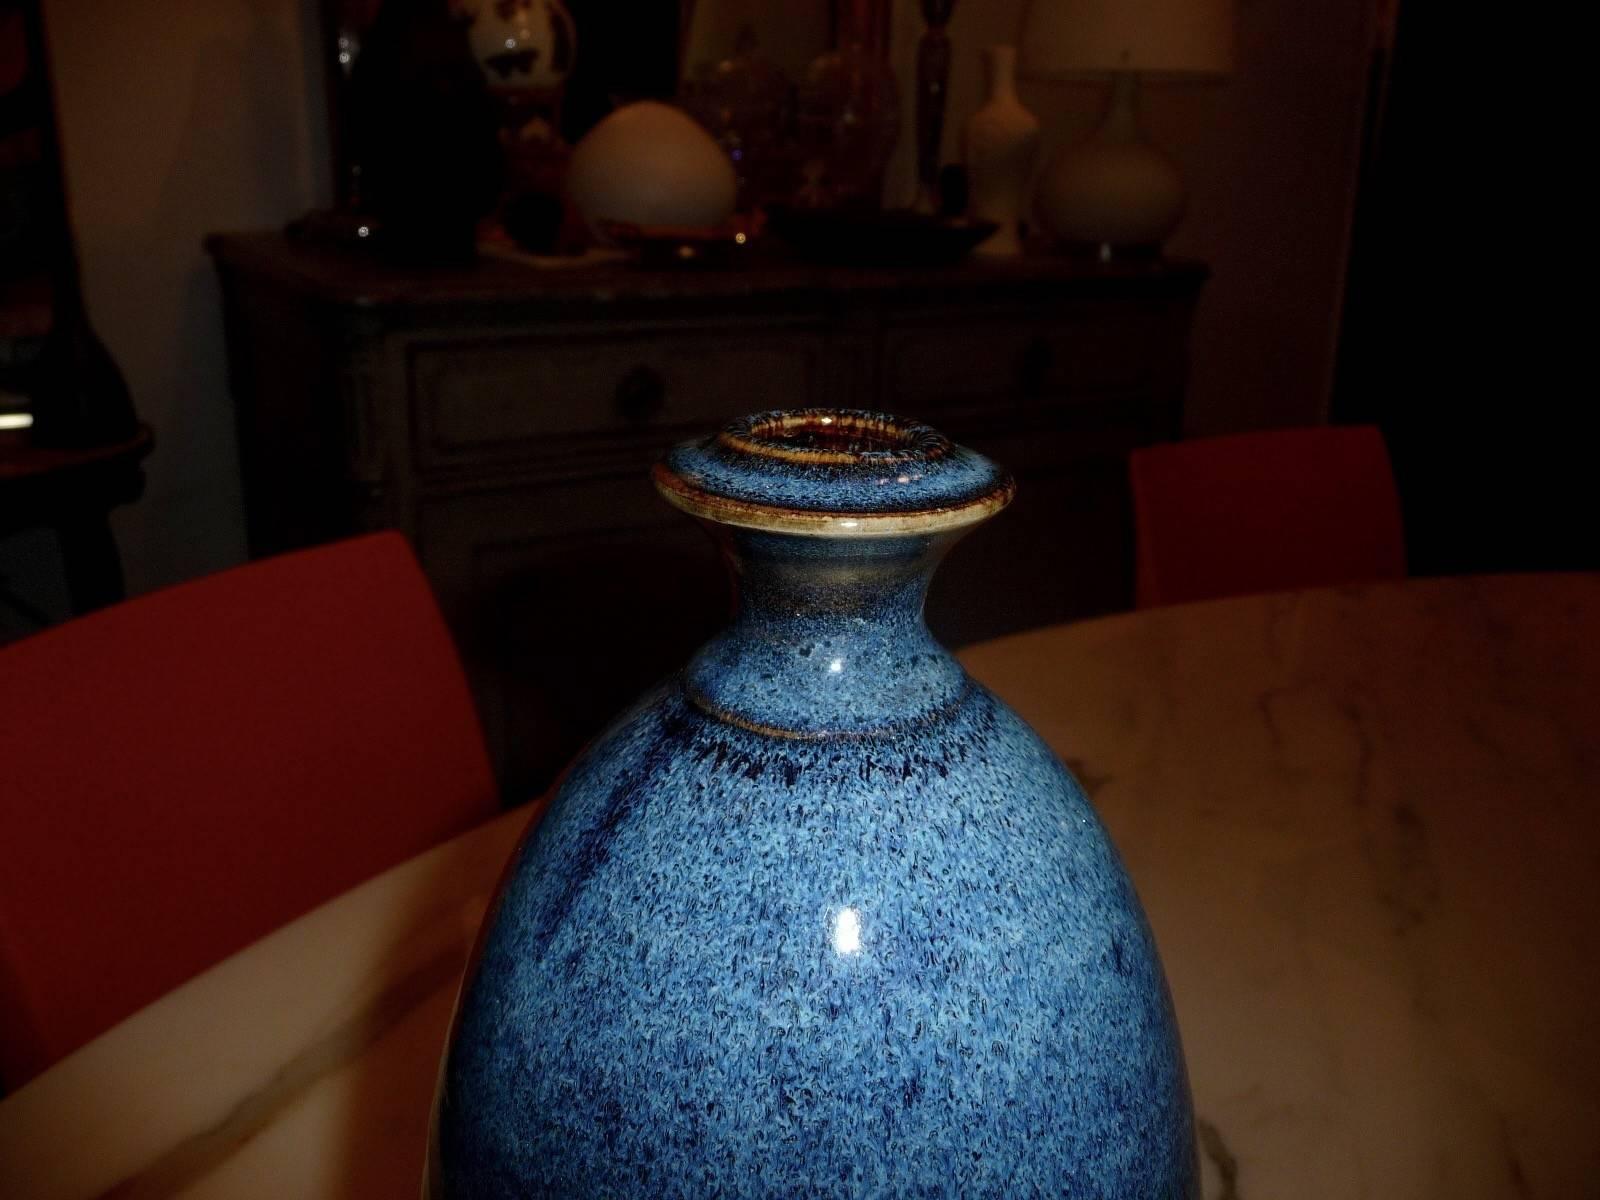 Ovoid stoneware vase, enameled decoration based on a hay ash with the dominant colors of blue and light blue. Extremely complex art work and virtuosic experiment for this potter. It stays on a small base.

Signed underneath D.Taizé

Free